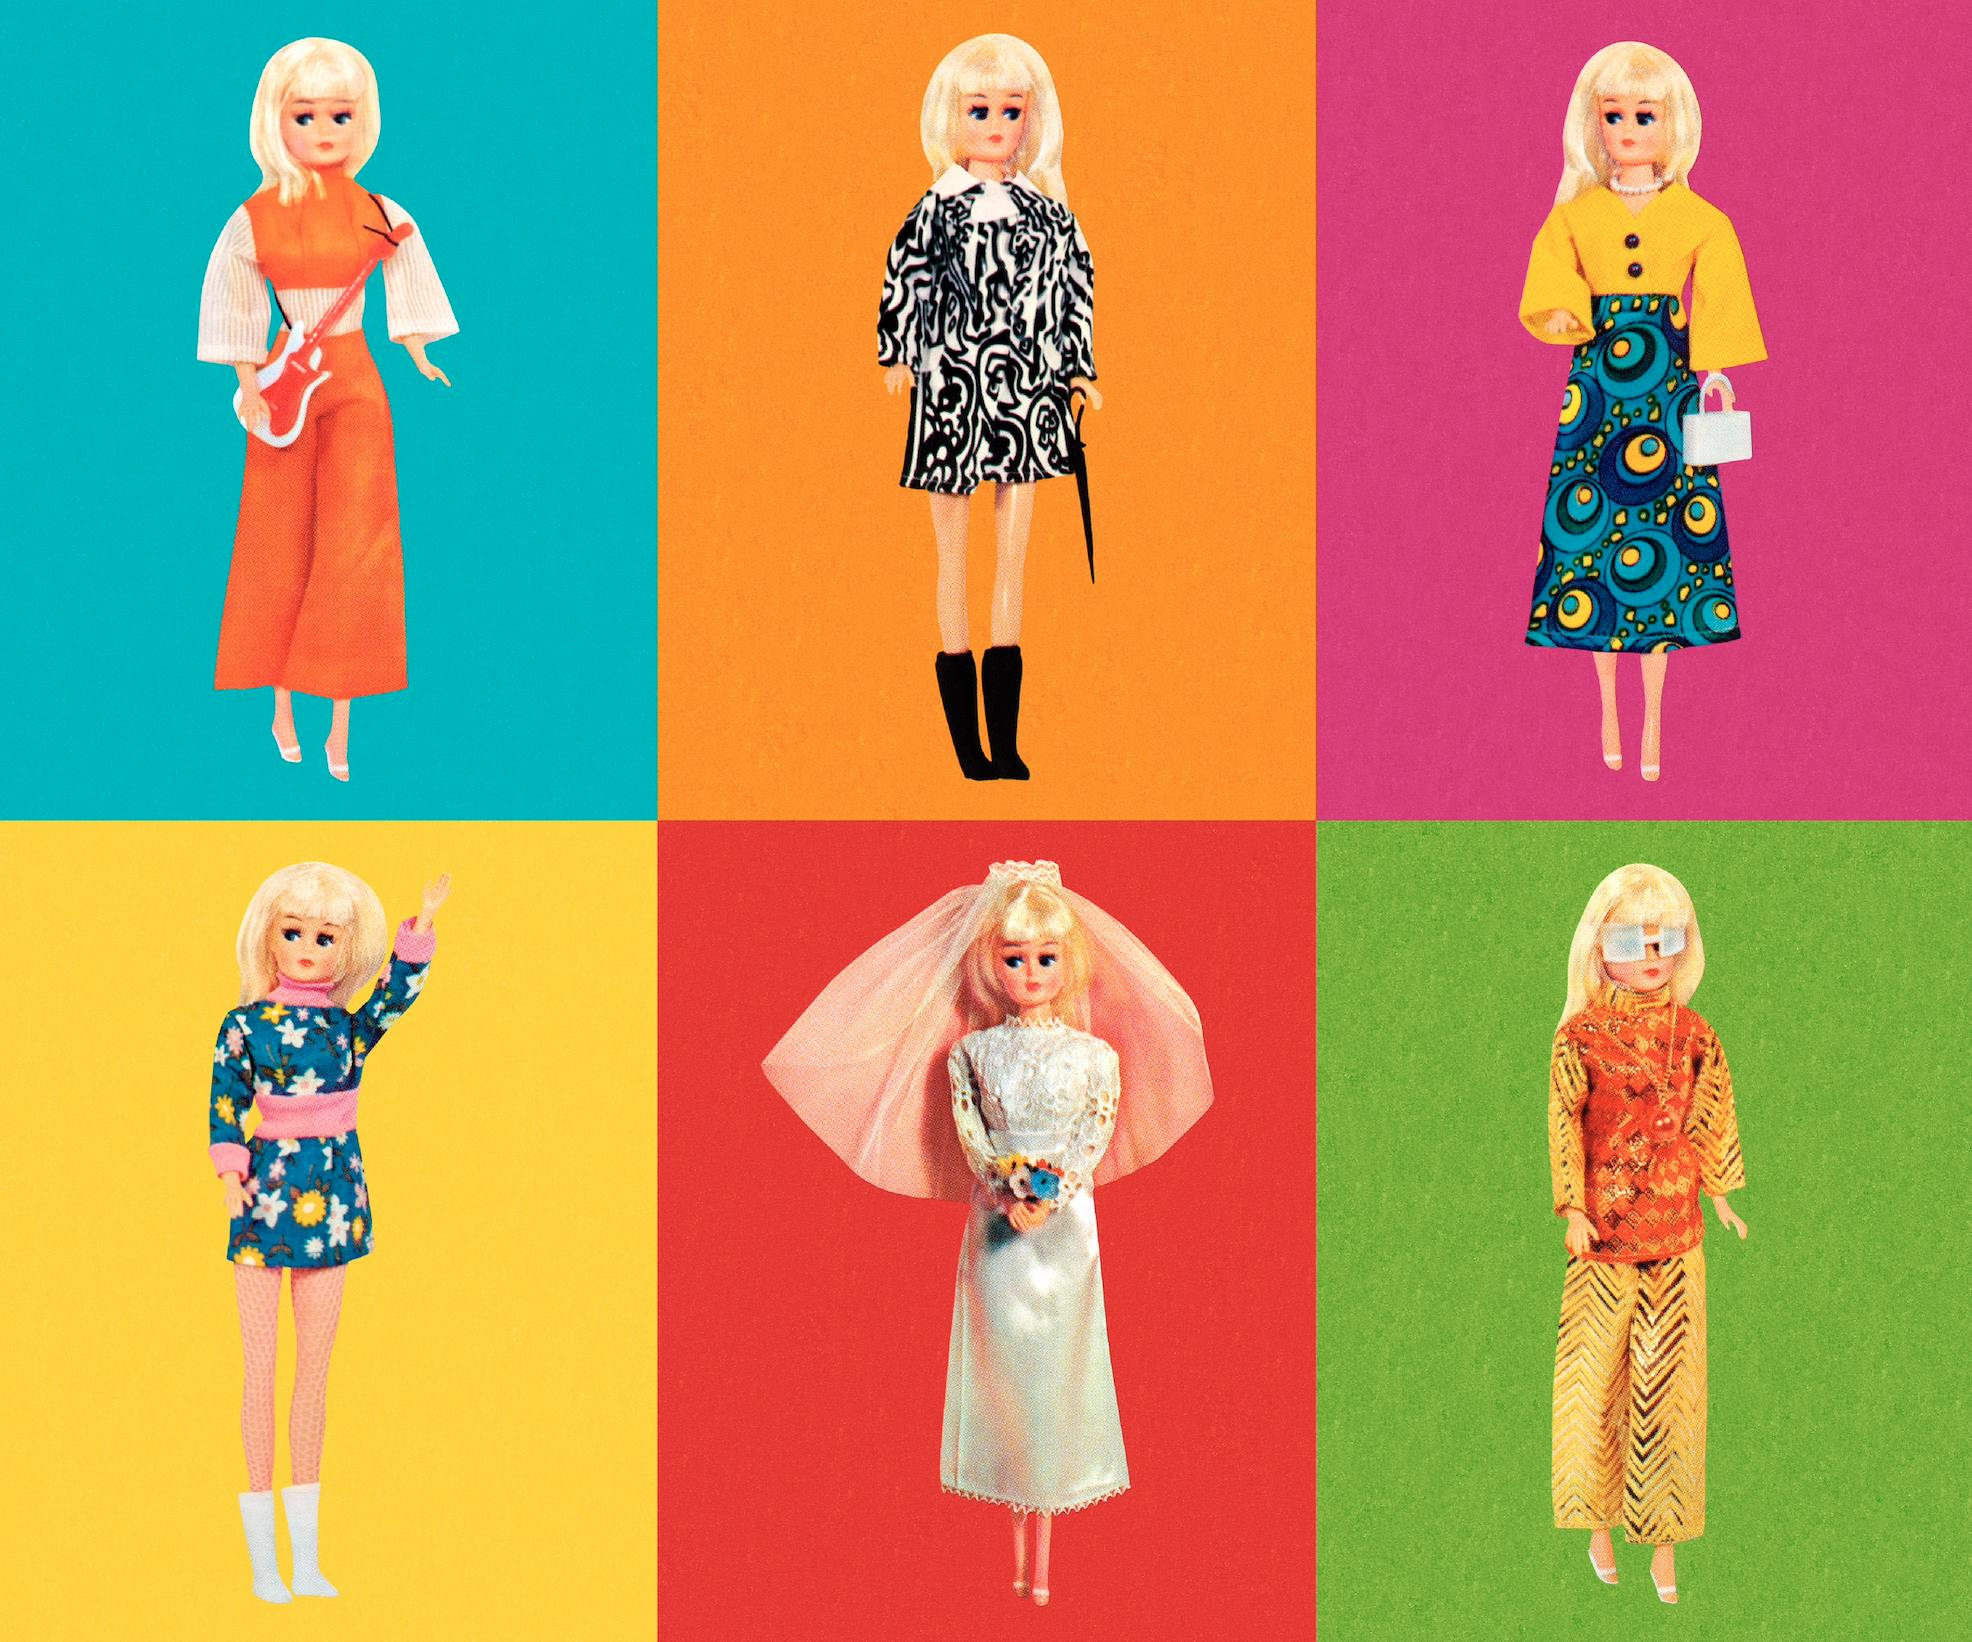 A Guide To Vintage Barbie Dolls, Clothing, Accessories and other